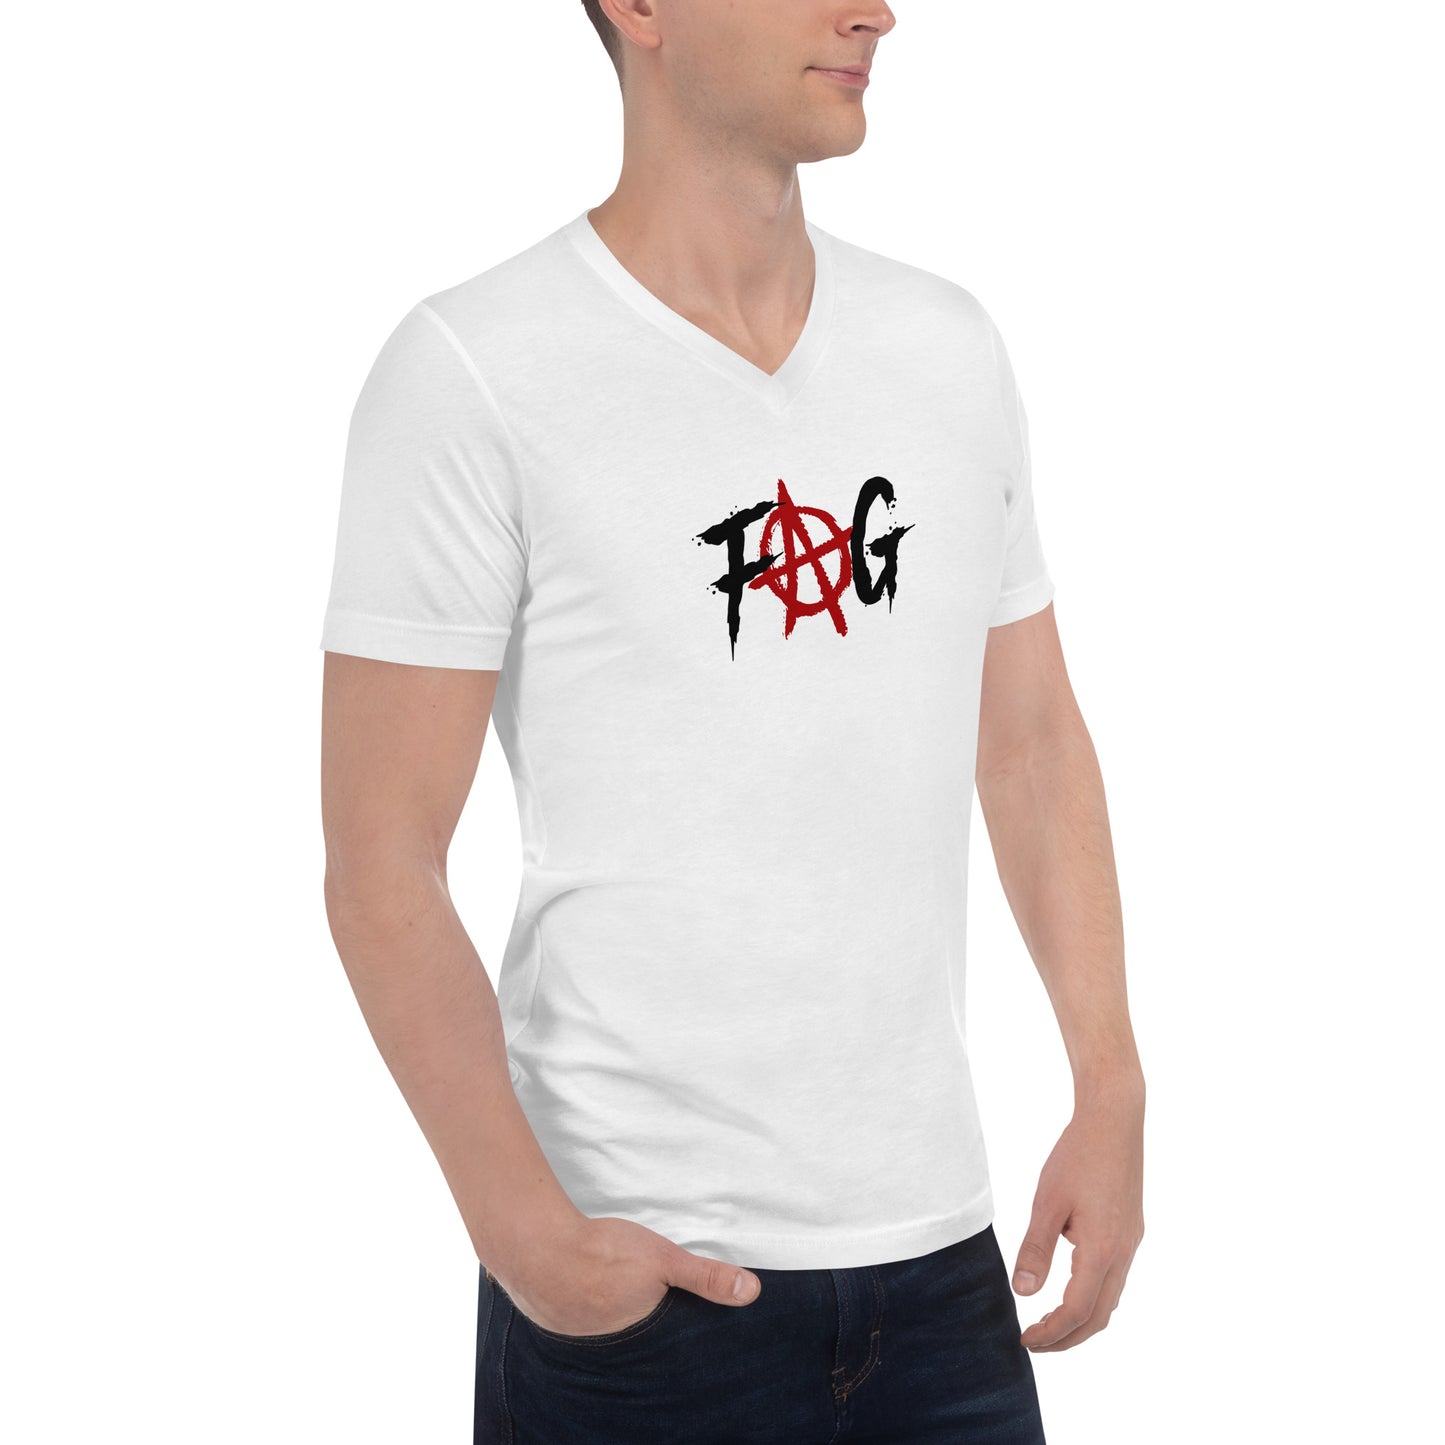 Queer Anarchy - Unisex Short Sleeve V-Neck T-Shirt